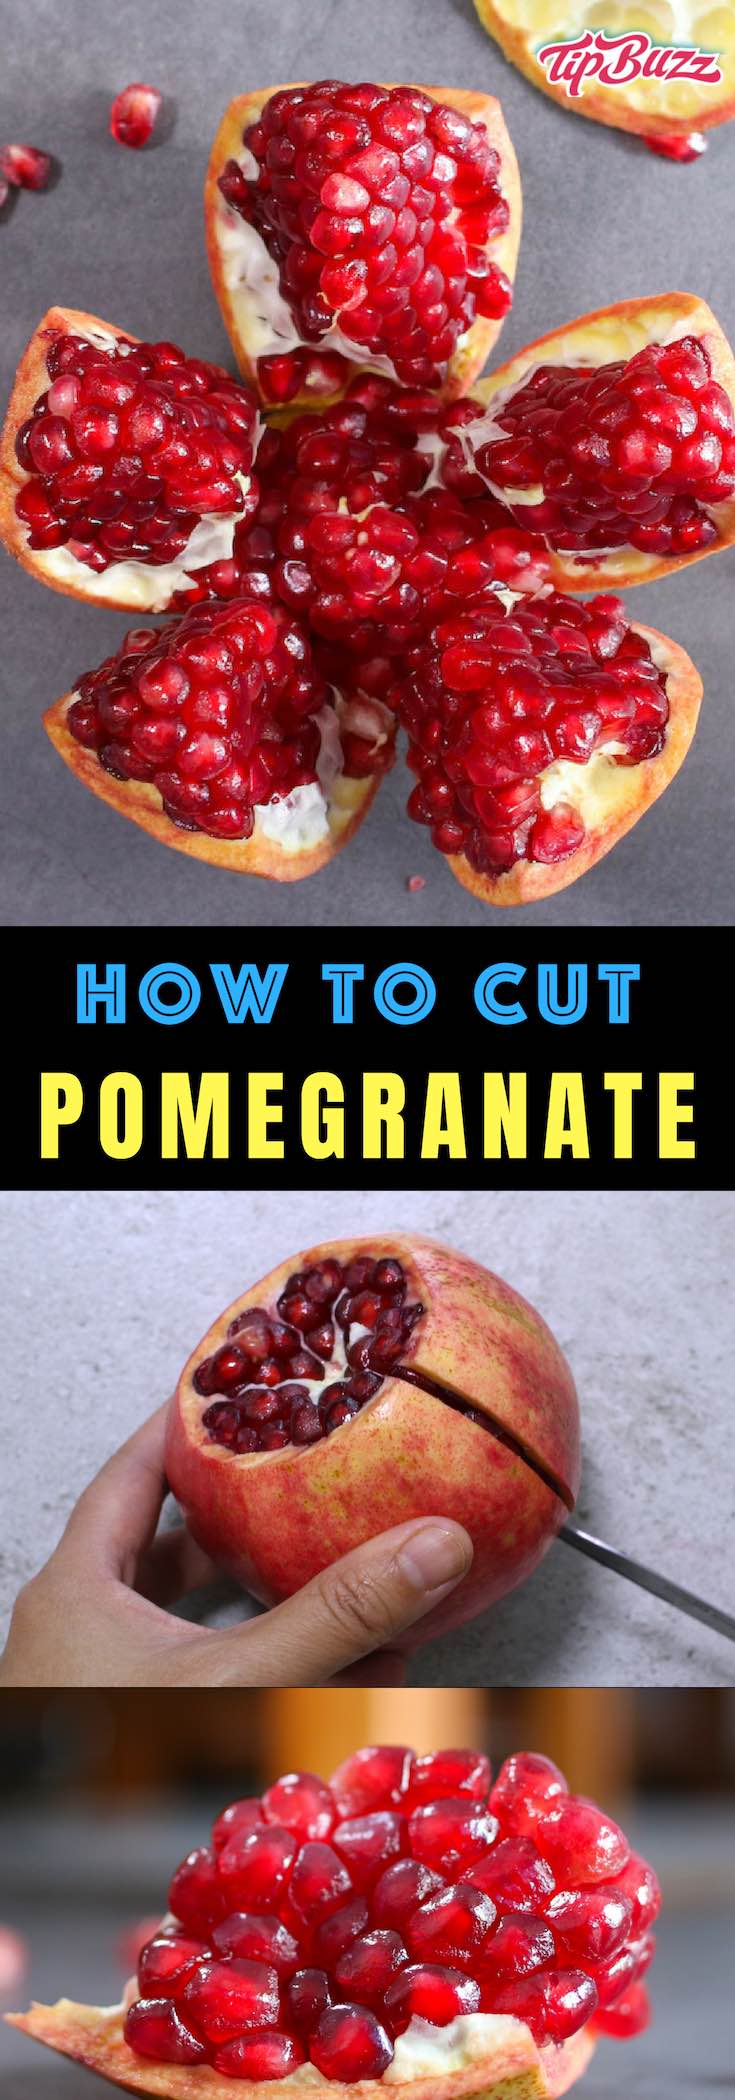 Learn how to cut a pomegranate quickly and easily using this simple step-by-step guide. Pomegranate makes a delicious and healthy snack with sweet, tart flavors and beautiful colors.